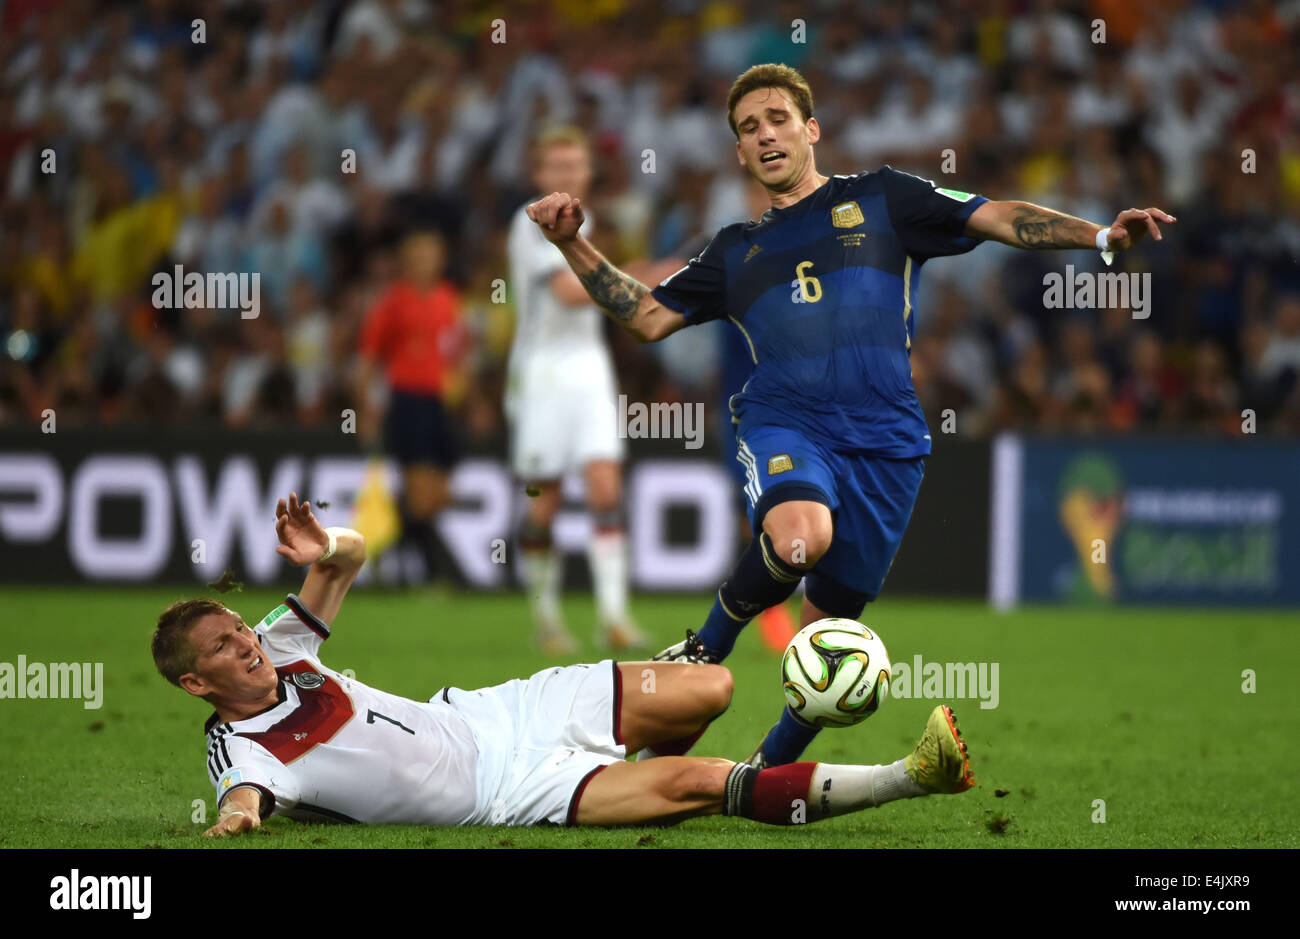 Rio De Janeiro, Brazil. 13th July, 2014. Germany's Bastian Schweinsteiger (L) tackles Argentina's Lucas Biglia during the final match between Germany and Argentina of 2014 FIFA World Cup at the Estadio do Maracana Stadium in Rio de Janeiro, Brazil, on July 13, 2014. Credit:  Guo Yong/Xinhua/Alamy Live News Stock Photo